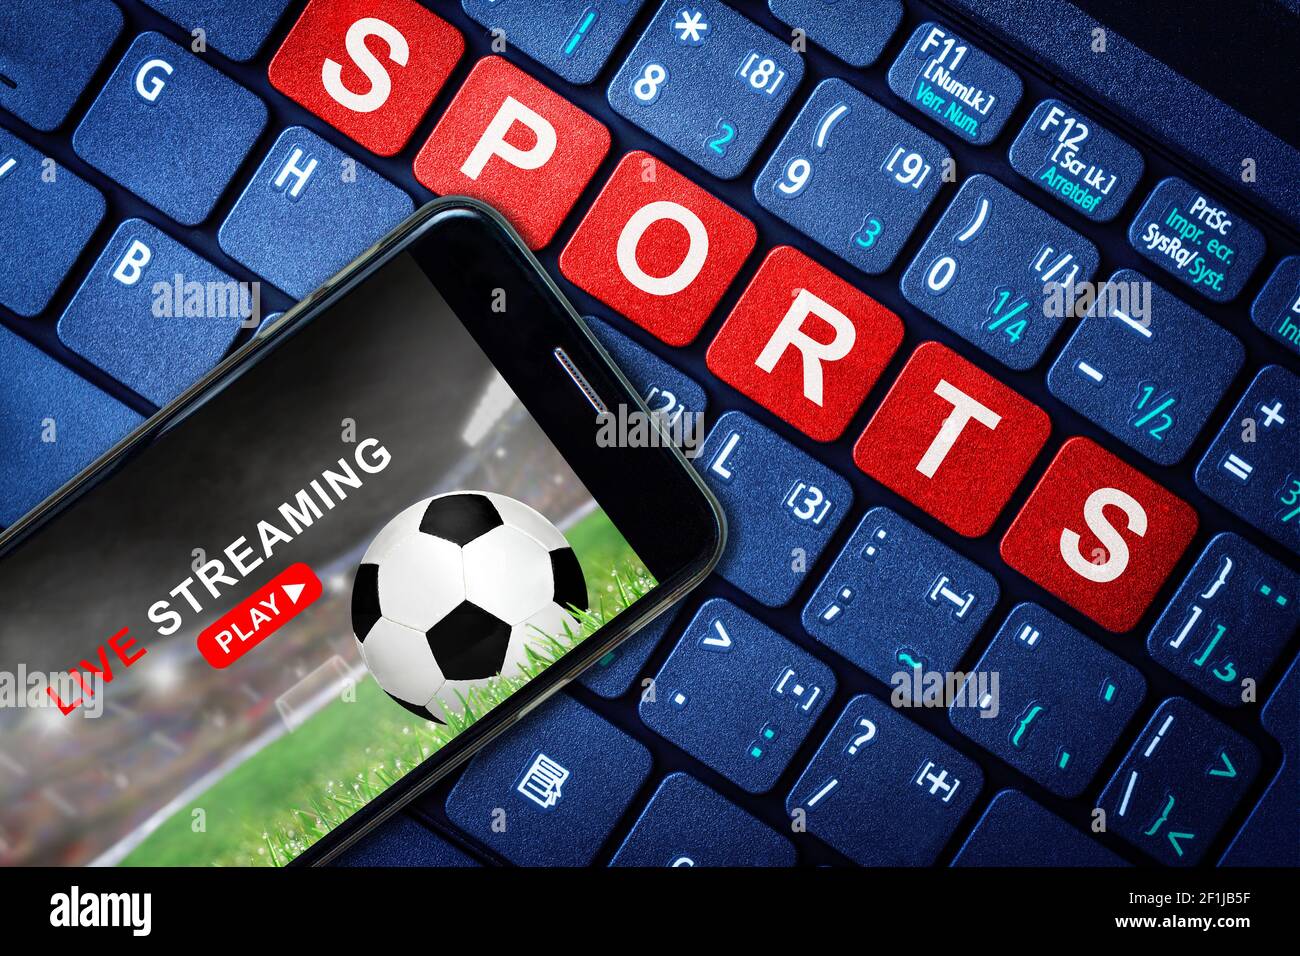 Sports Live streaming concept showing Soccer or football game broadcast on smartphone with laptop high tech background. Accessible on demand digital c Stock Photo